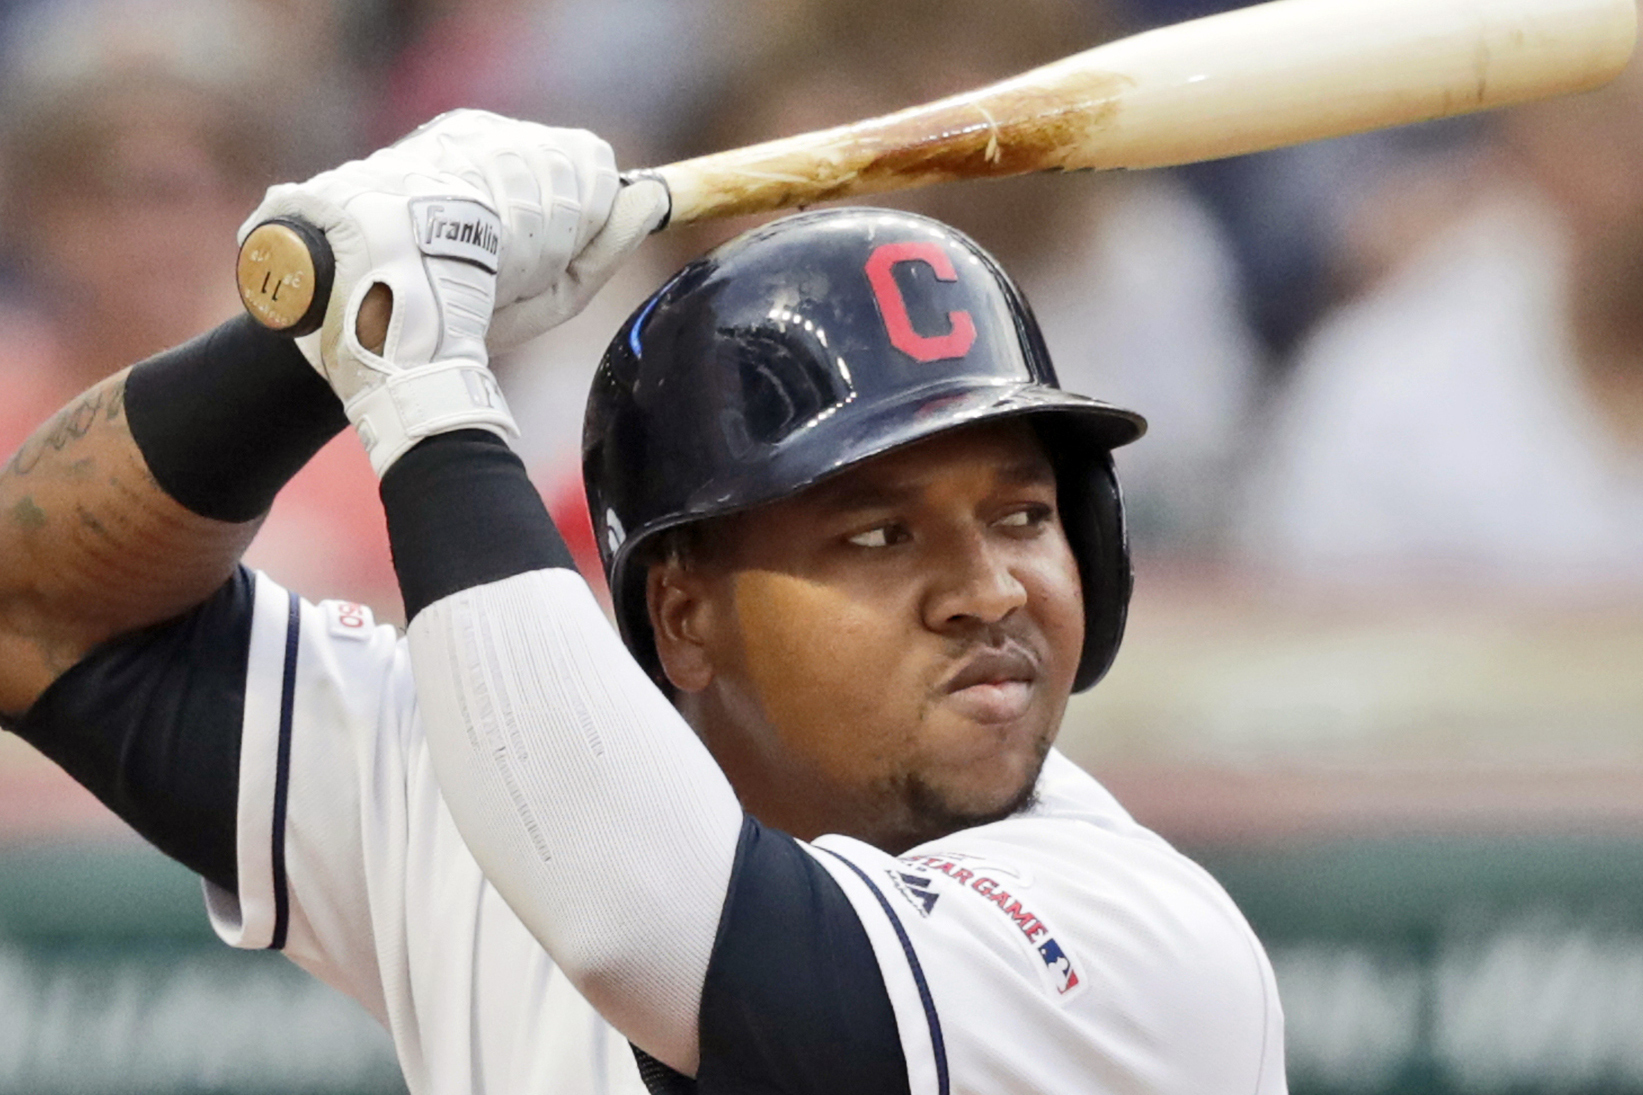 Jose Ramirez shows left- and right-handed power: On this date in